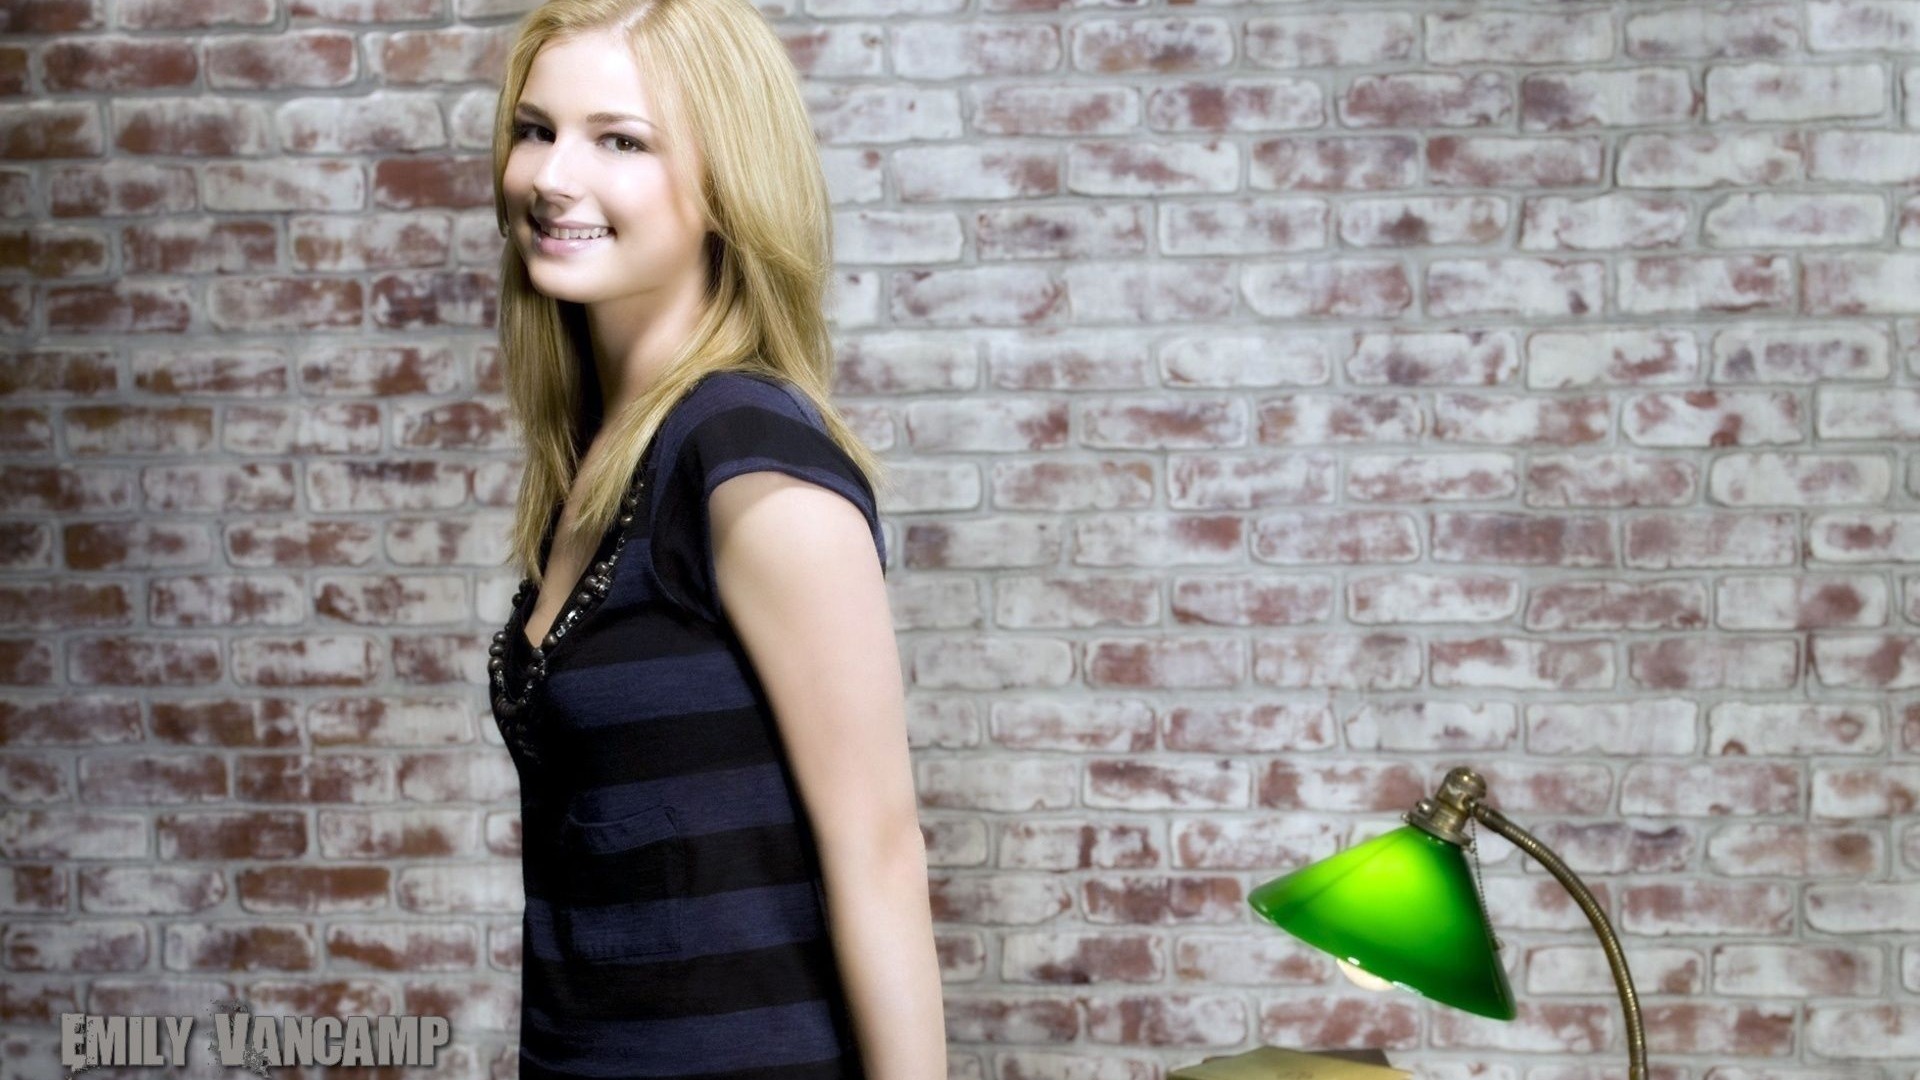 Emily VanCamp #014 - 1920x1080 Wallpapers Pictures Photos Images